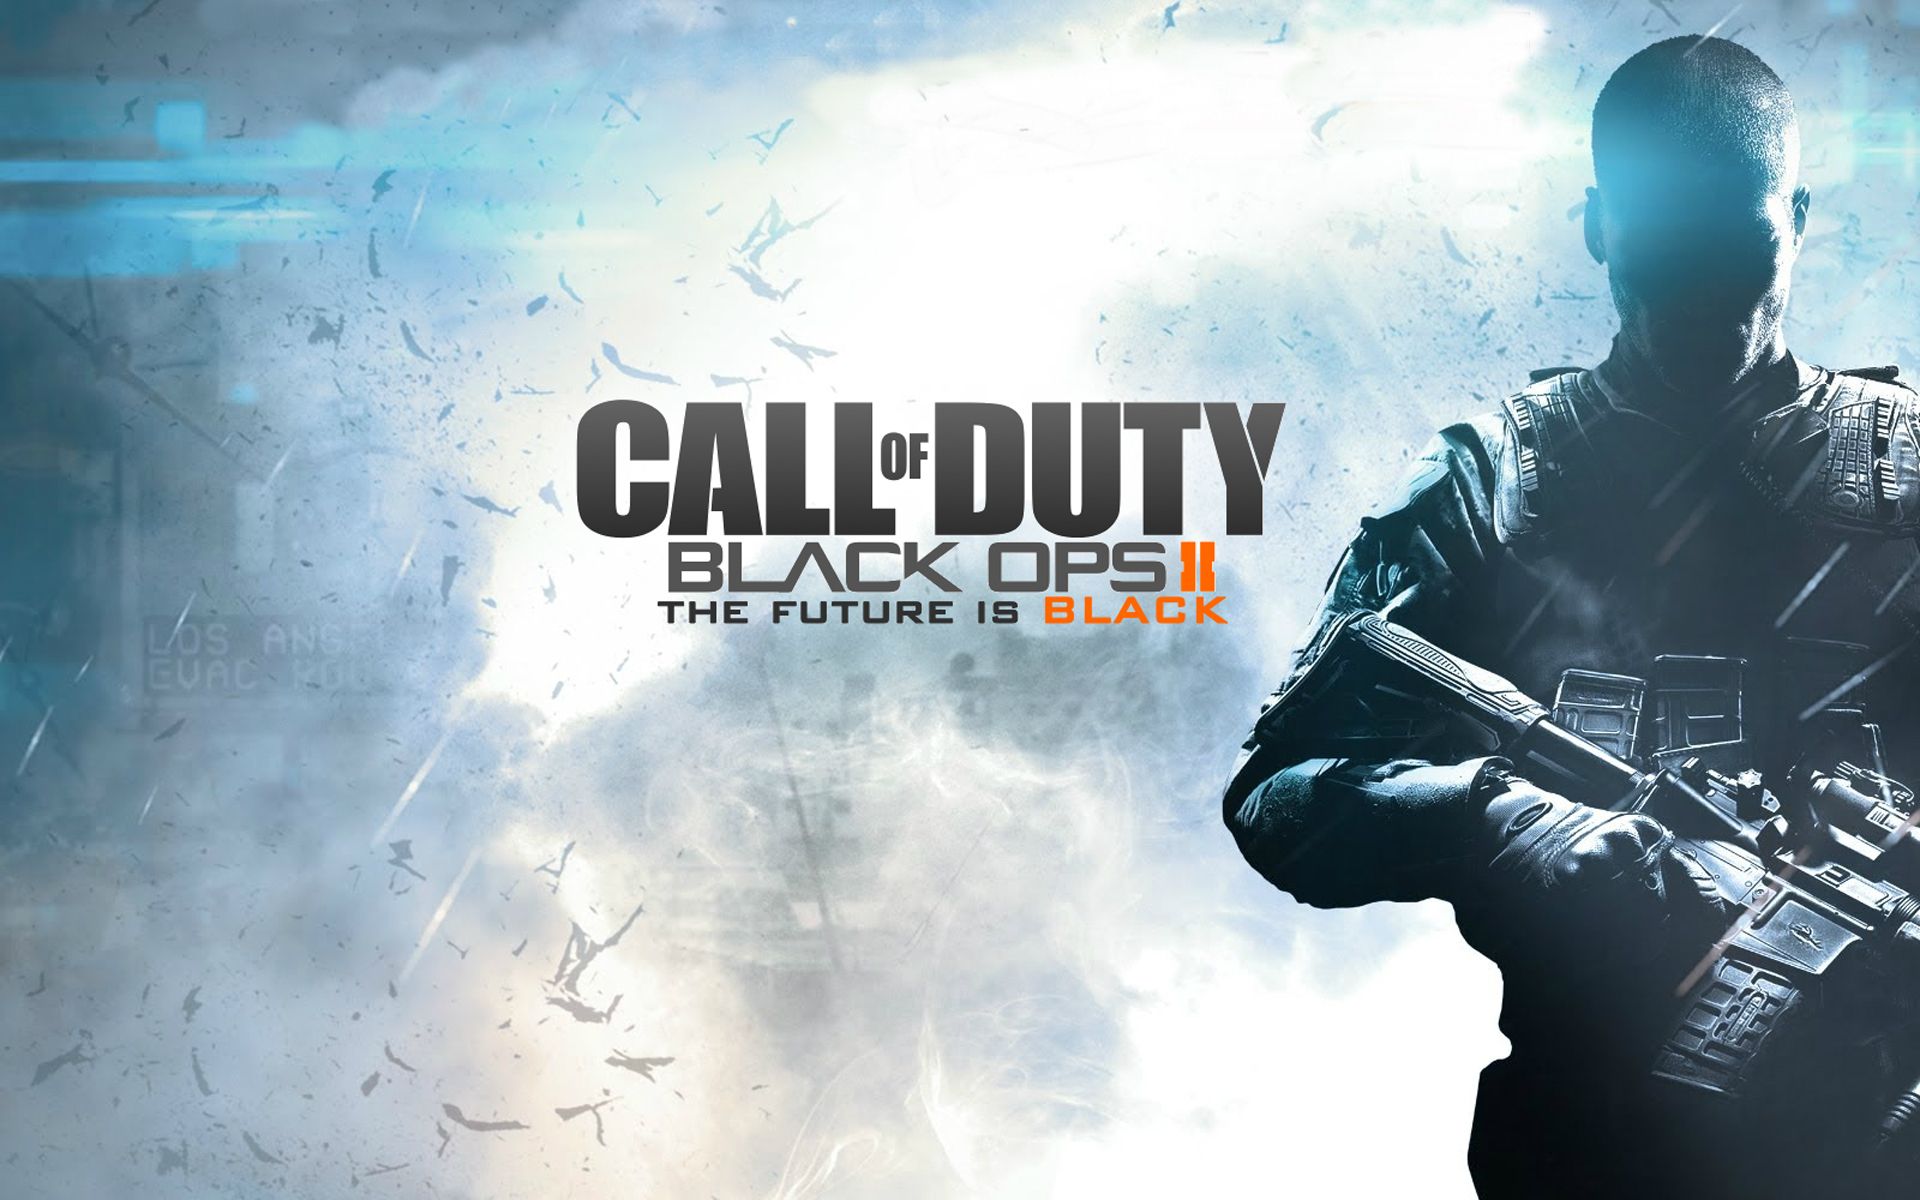 2013 Call of Duty Black Ops 2 Wallpapers | HD Wallpapers